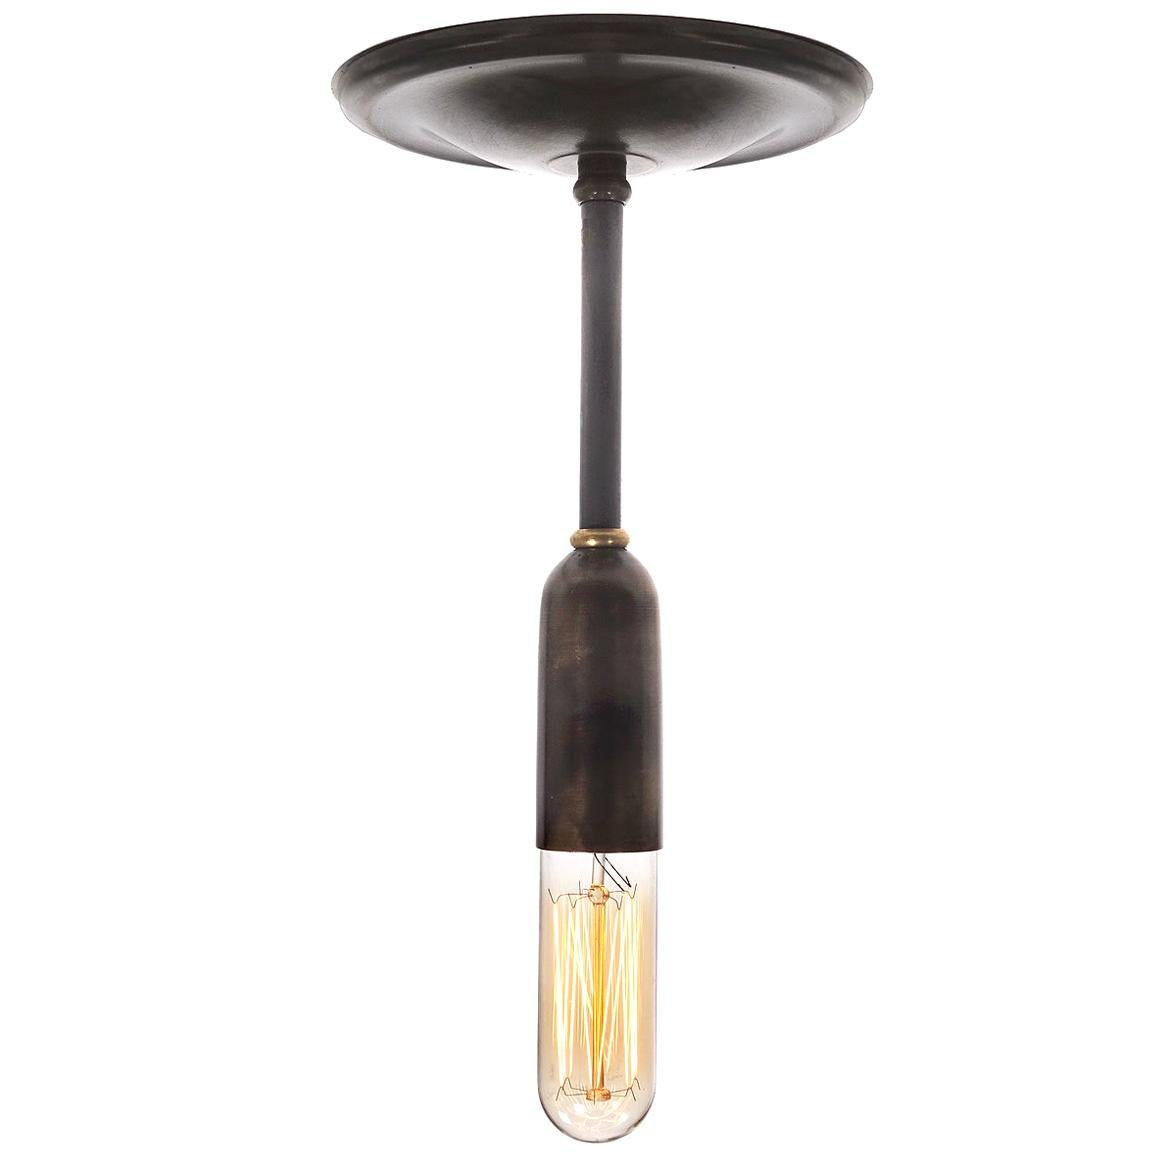 This is a very clean and simple pill shaped lamp. The lamp is half brass and half bulb on a brass rod that can created with a 3 inch to 36 inch pipe drop. Let us know the length and we will finish it to your specs. The look goes well with all